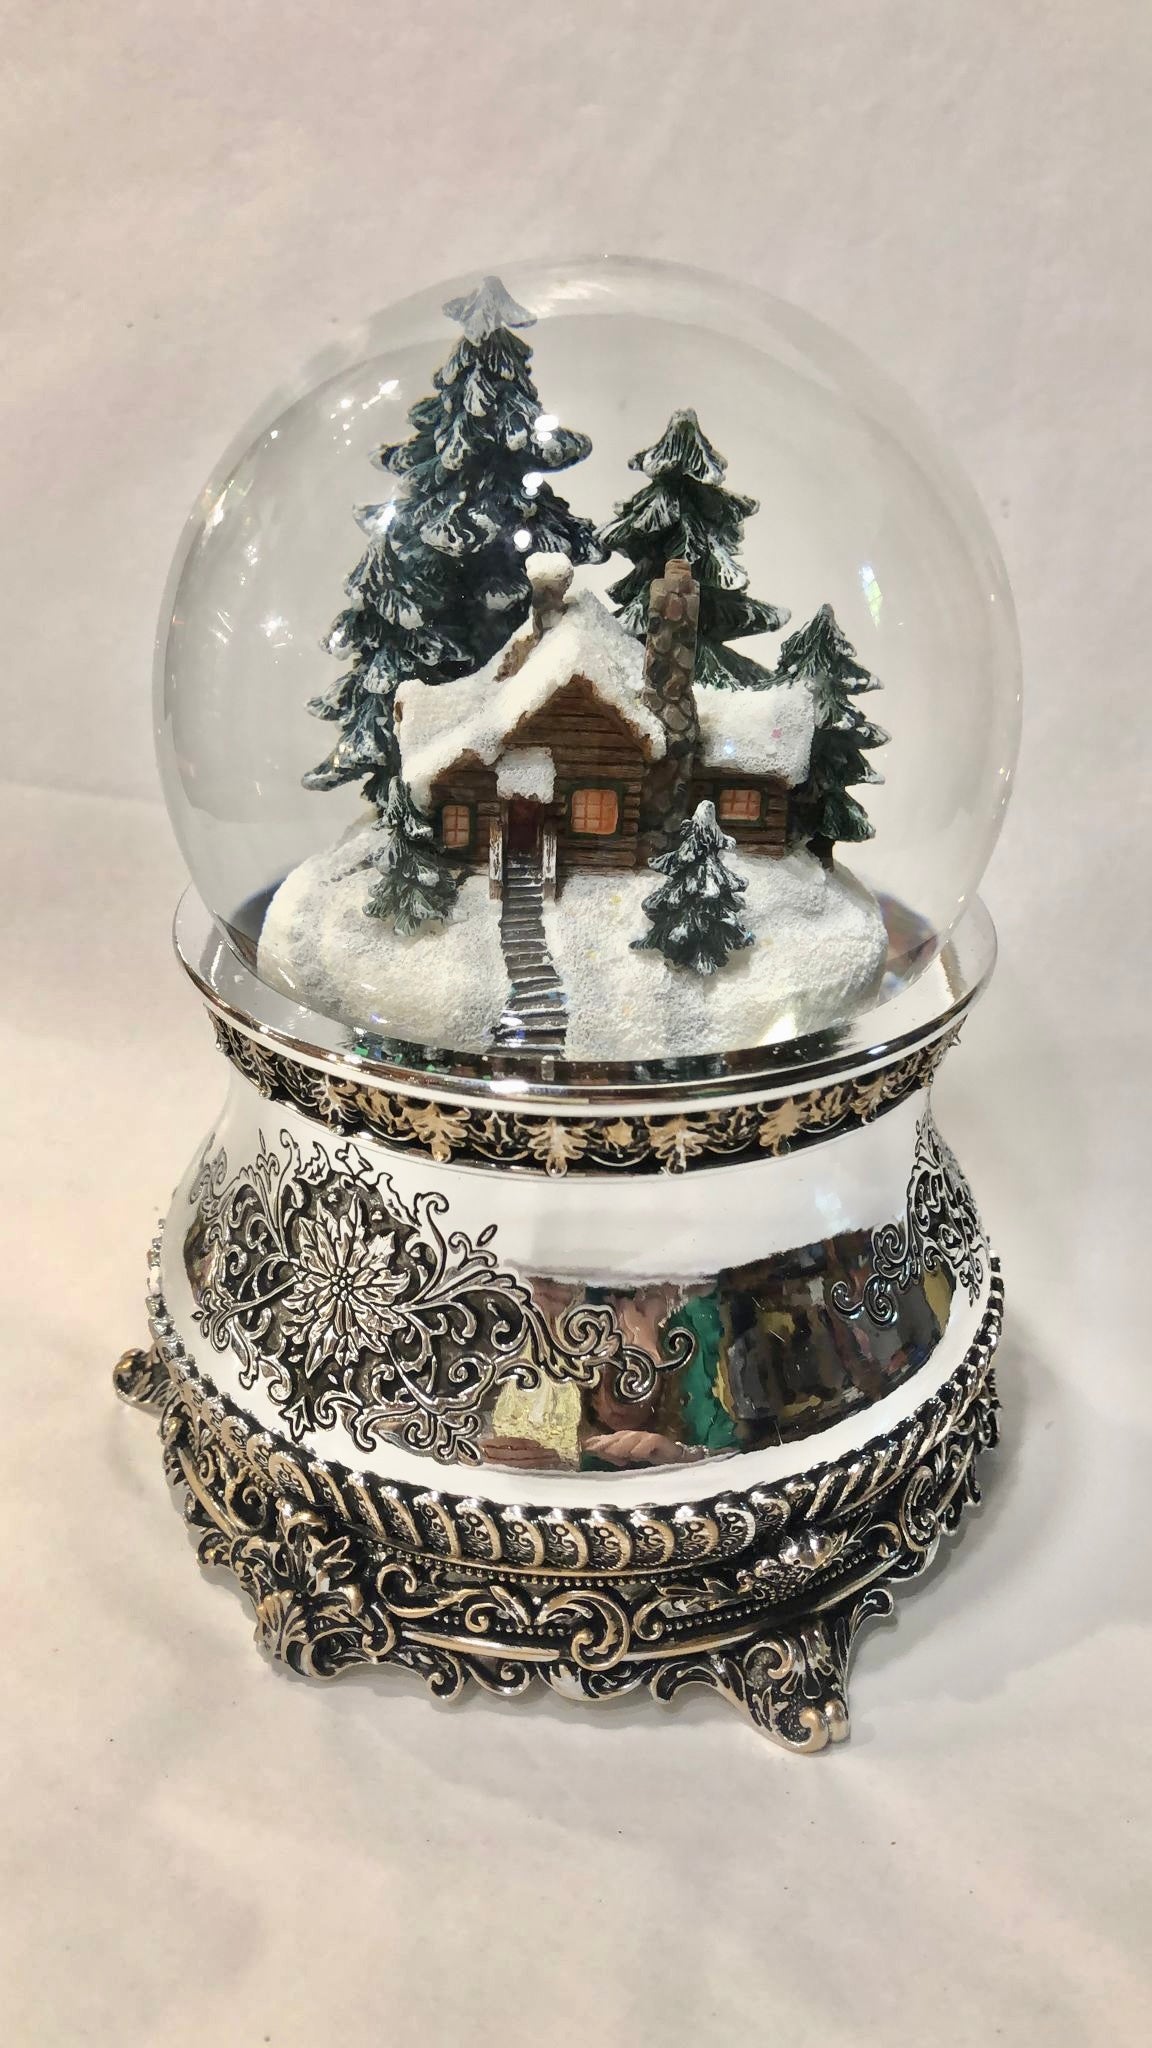 Snow globe with a house in the forest